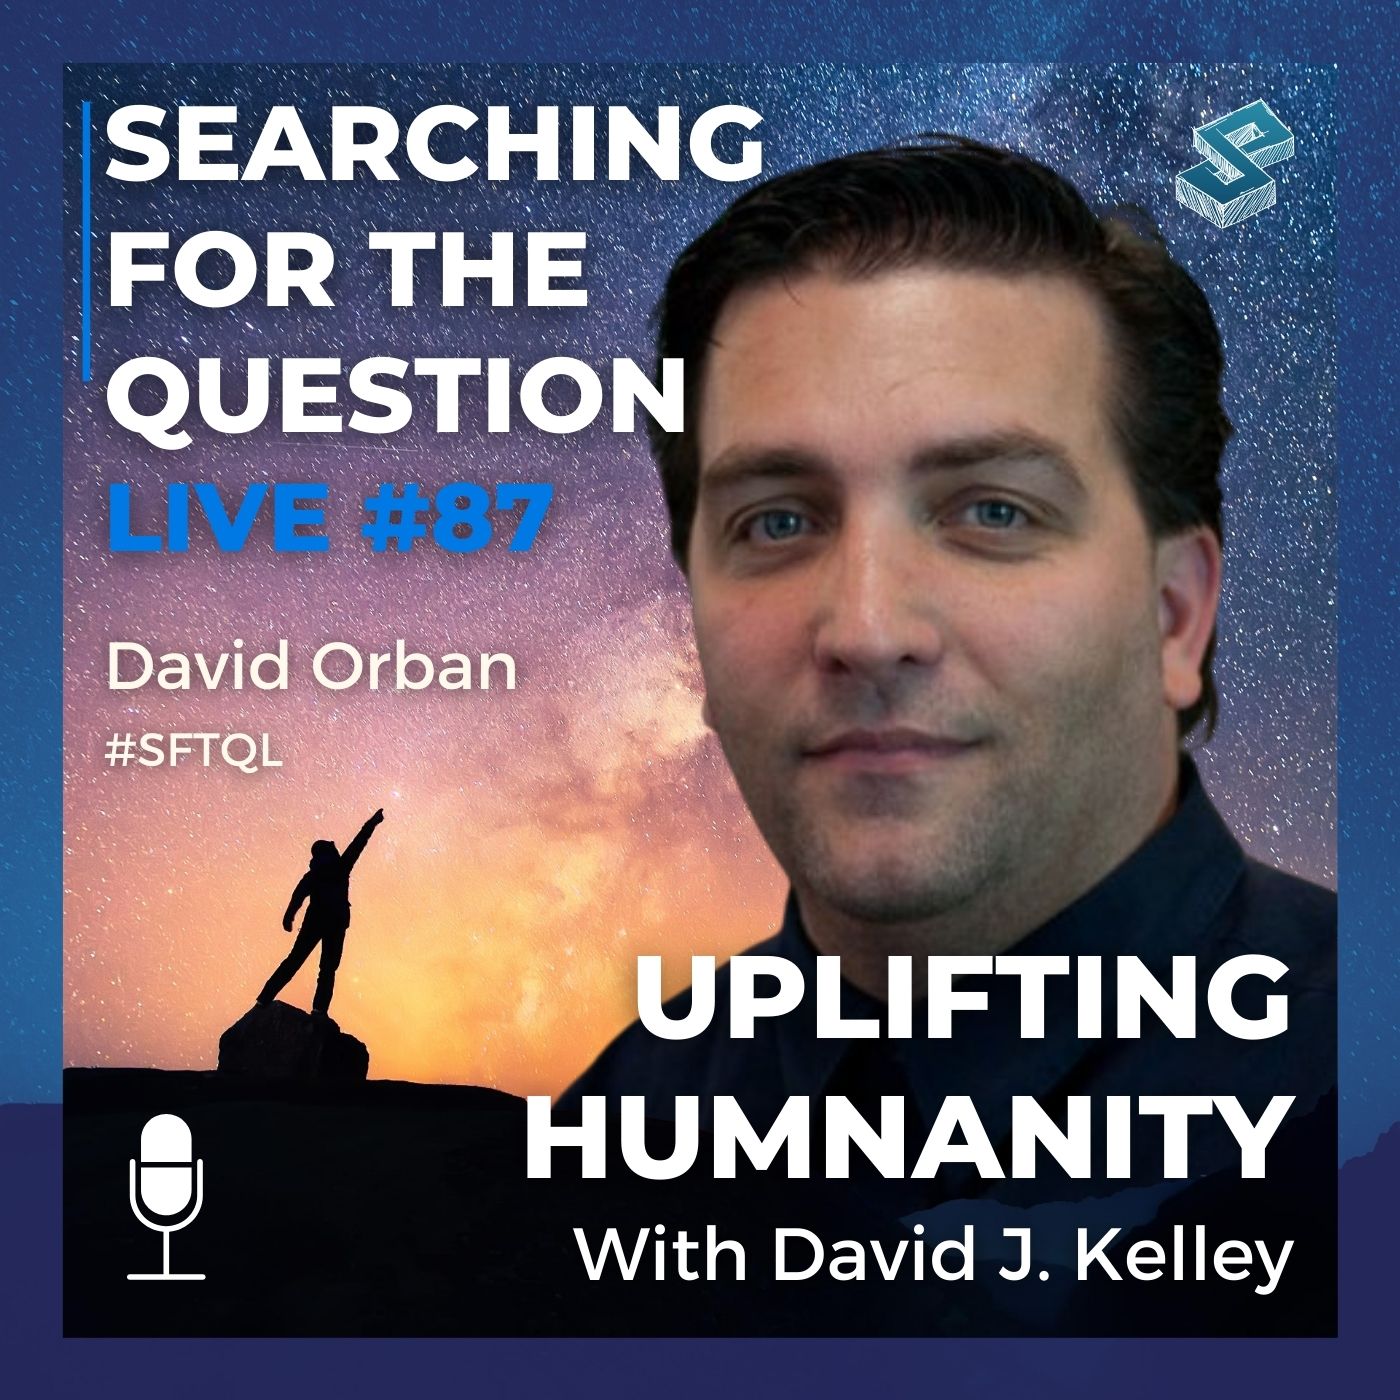 Uplifting Humanity with David J. Kelley - Searching For The Question Live #87